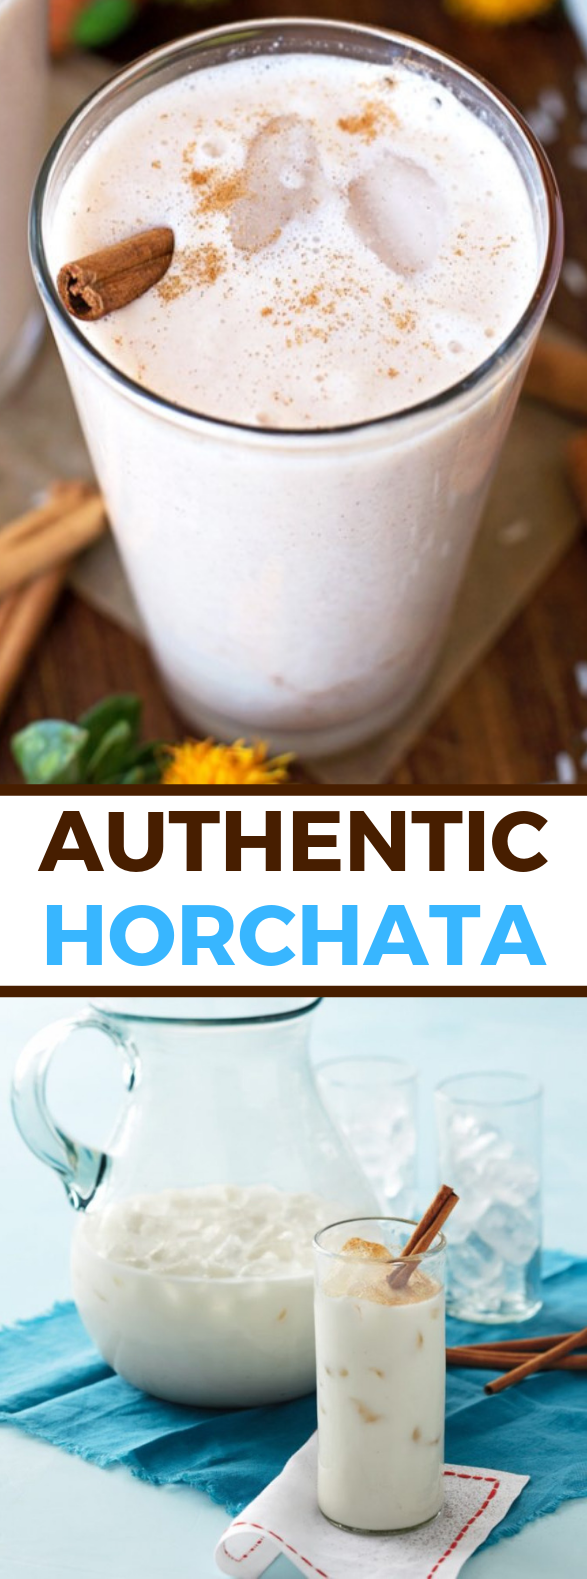 Authentic Horchata #drink #cocktail